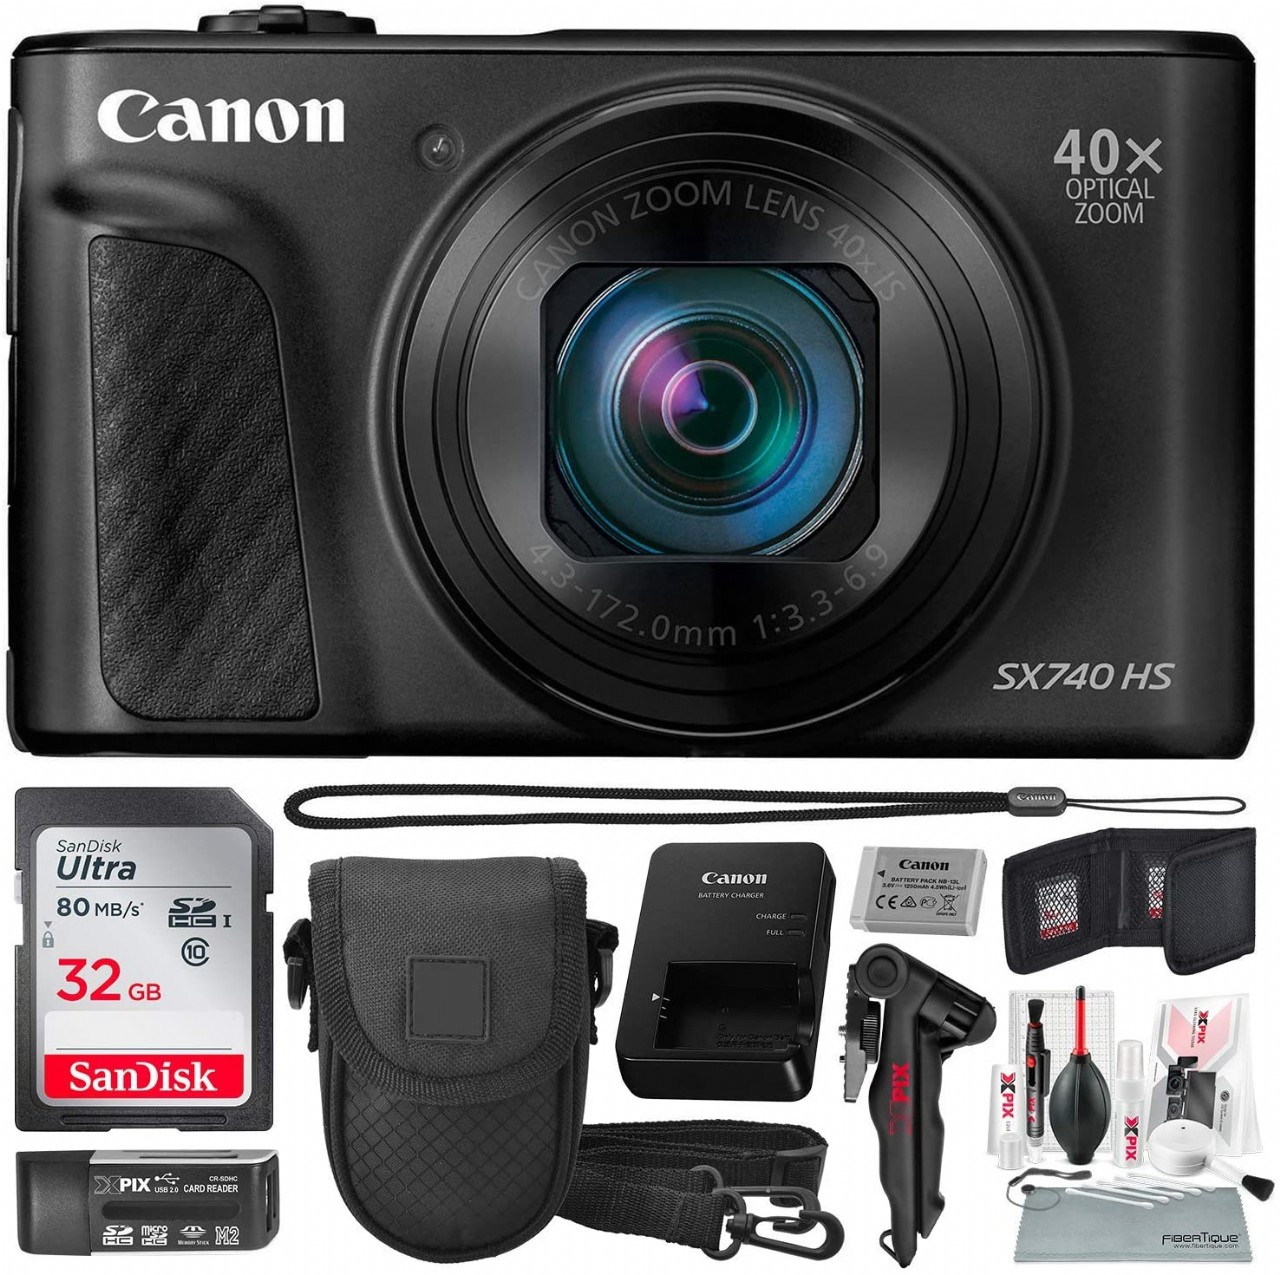 Canon PowerShot SX740 HS Digital Camera (Black) with 32GB Card & Point and Shoot Case Photo Savings